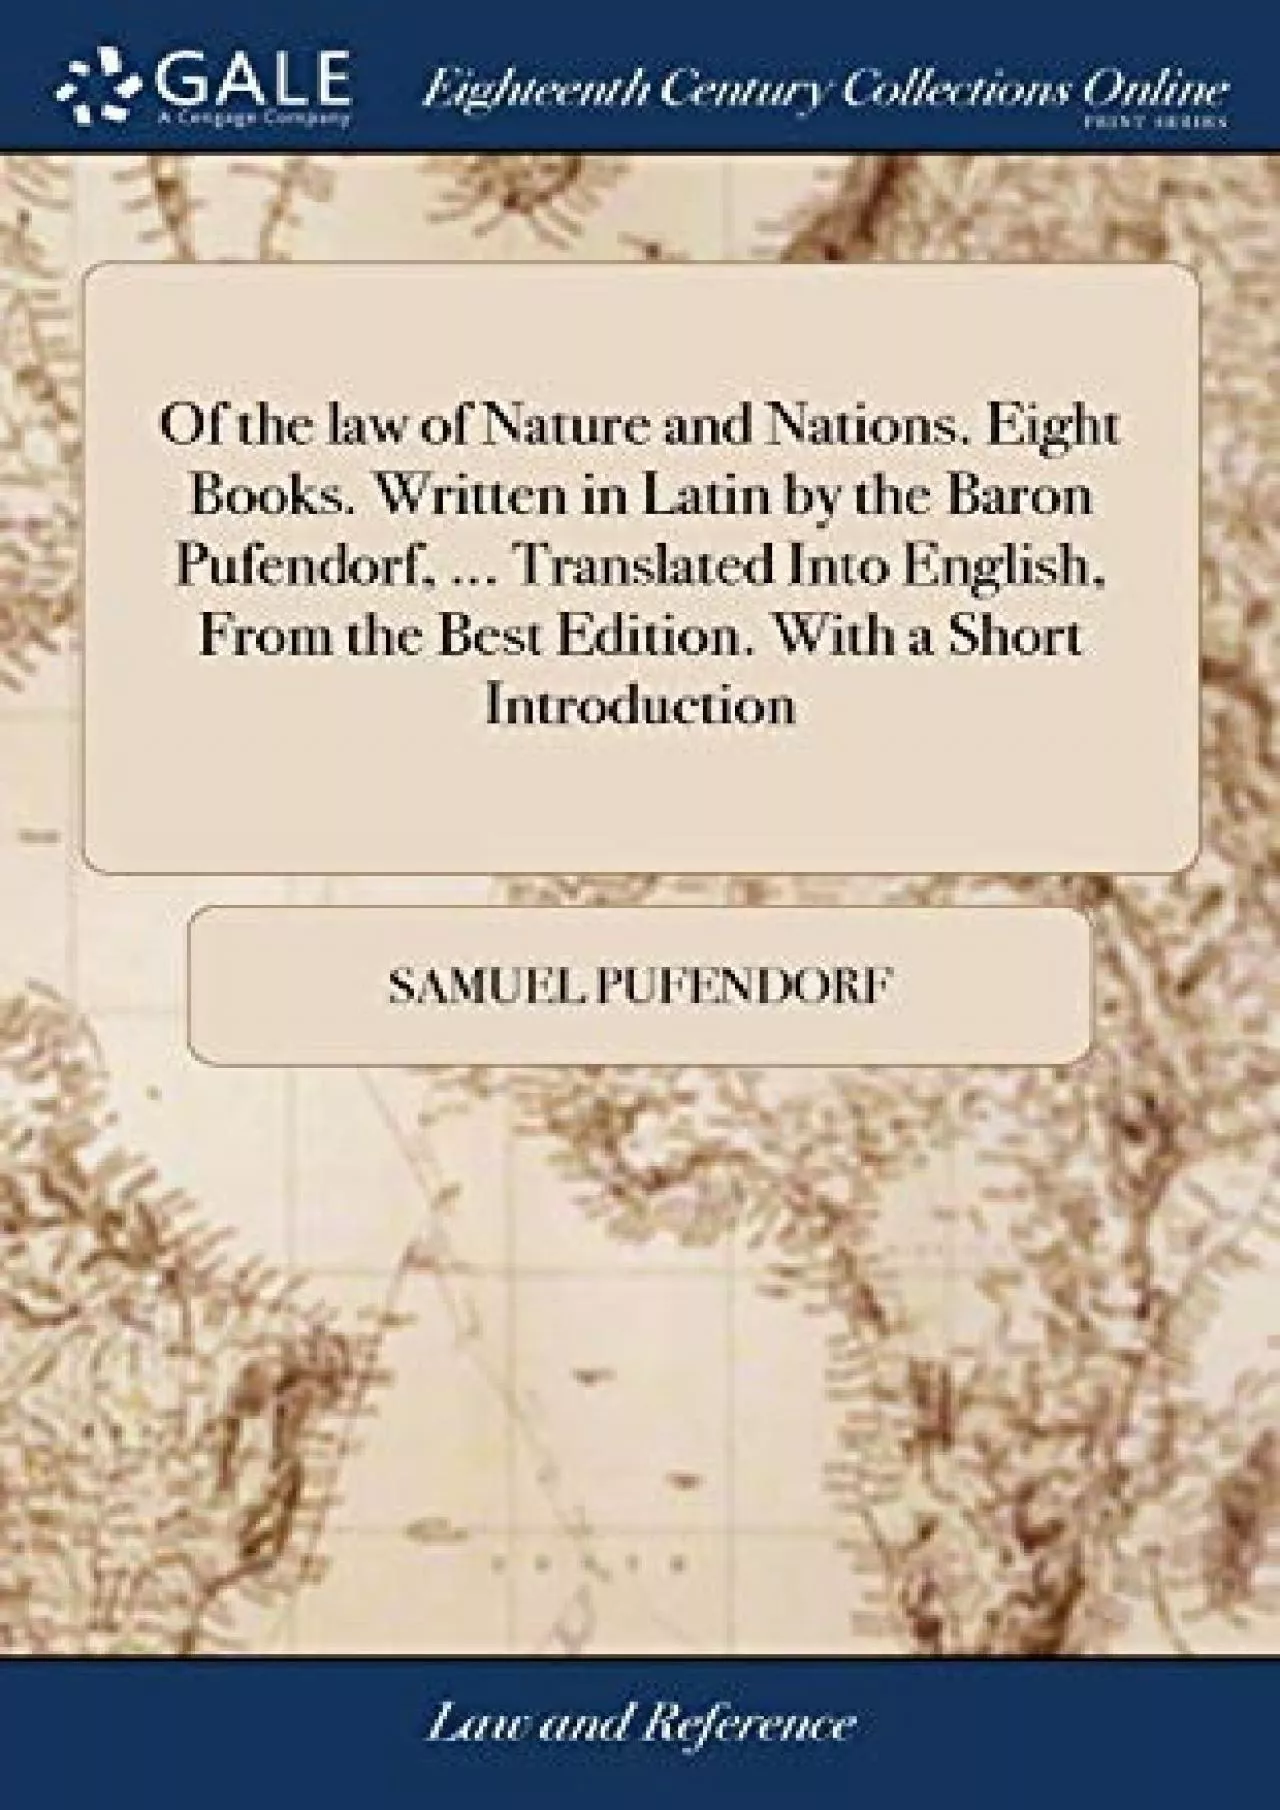 [PDF] DOWNLOAD Of the law of Nature and Nations. Eight Books. Written in Latin by the